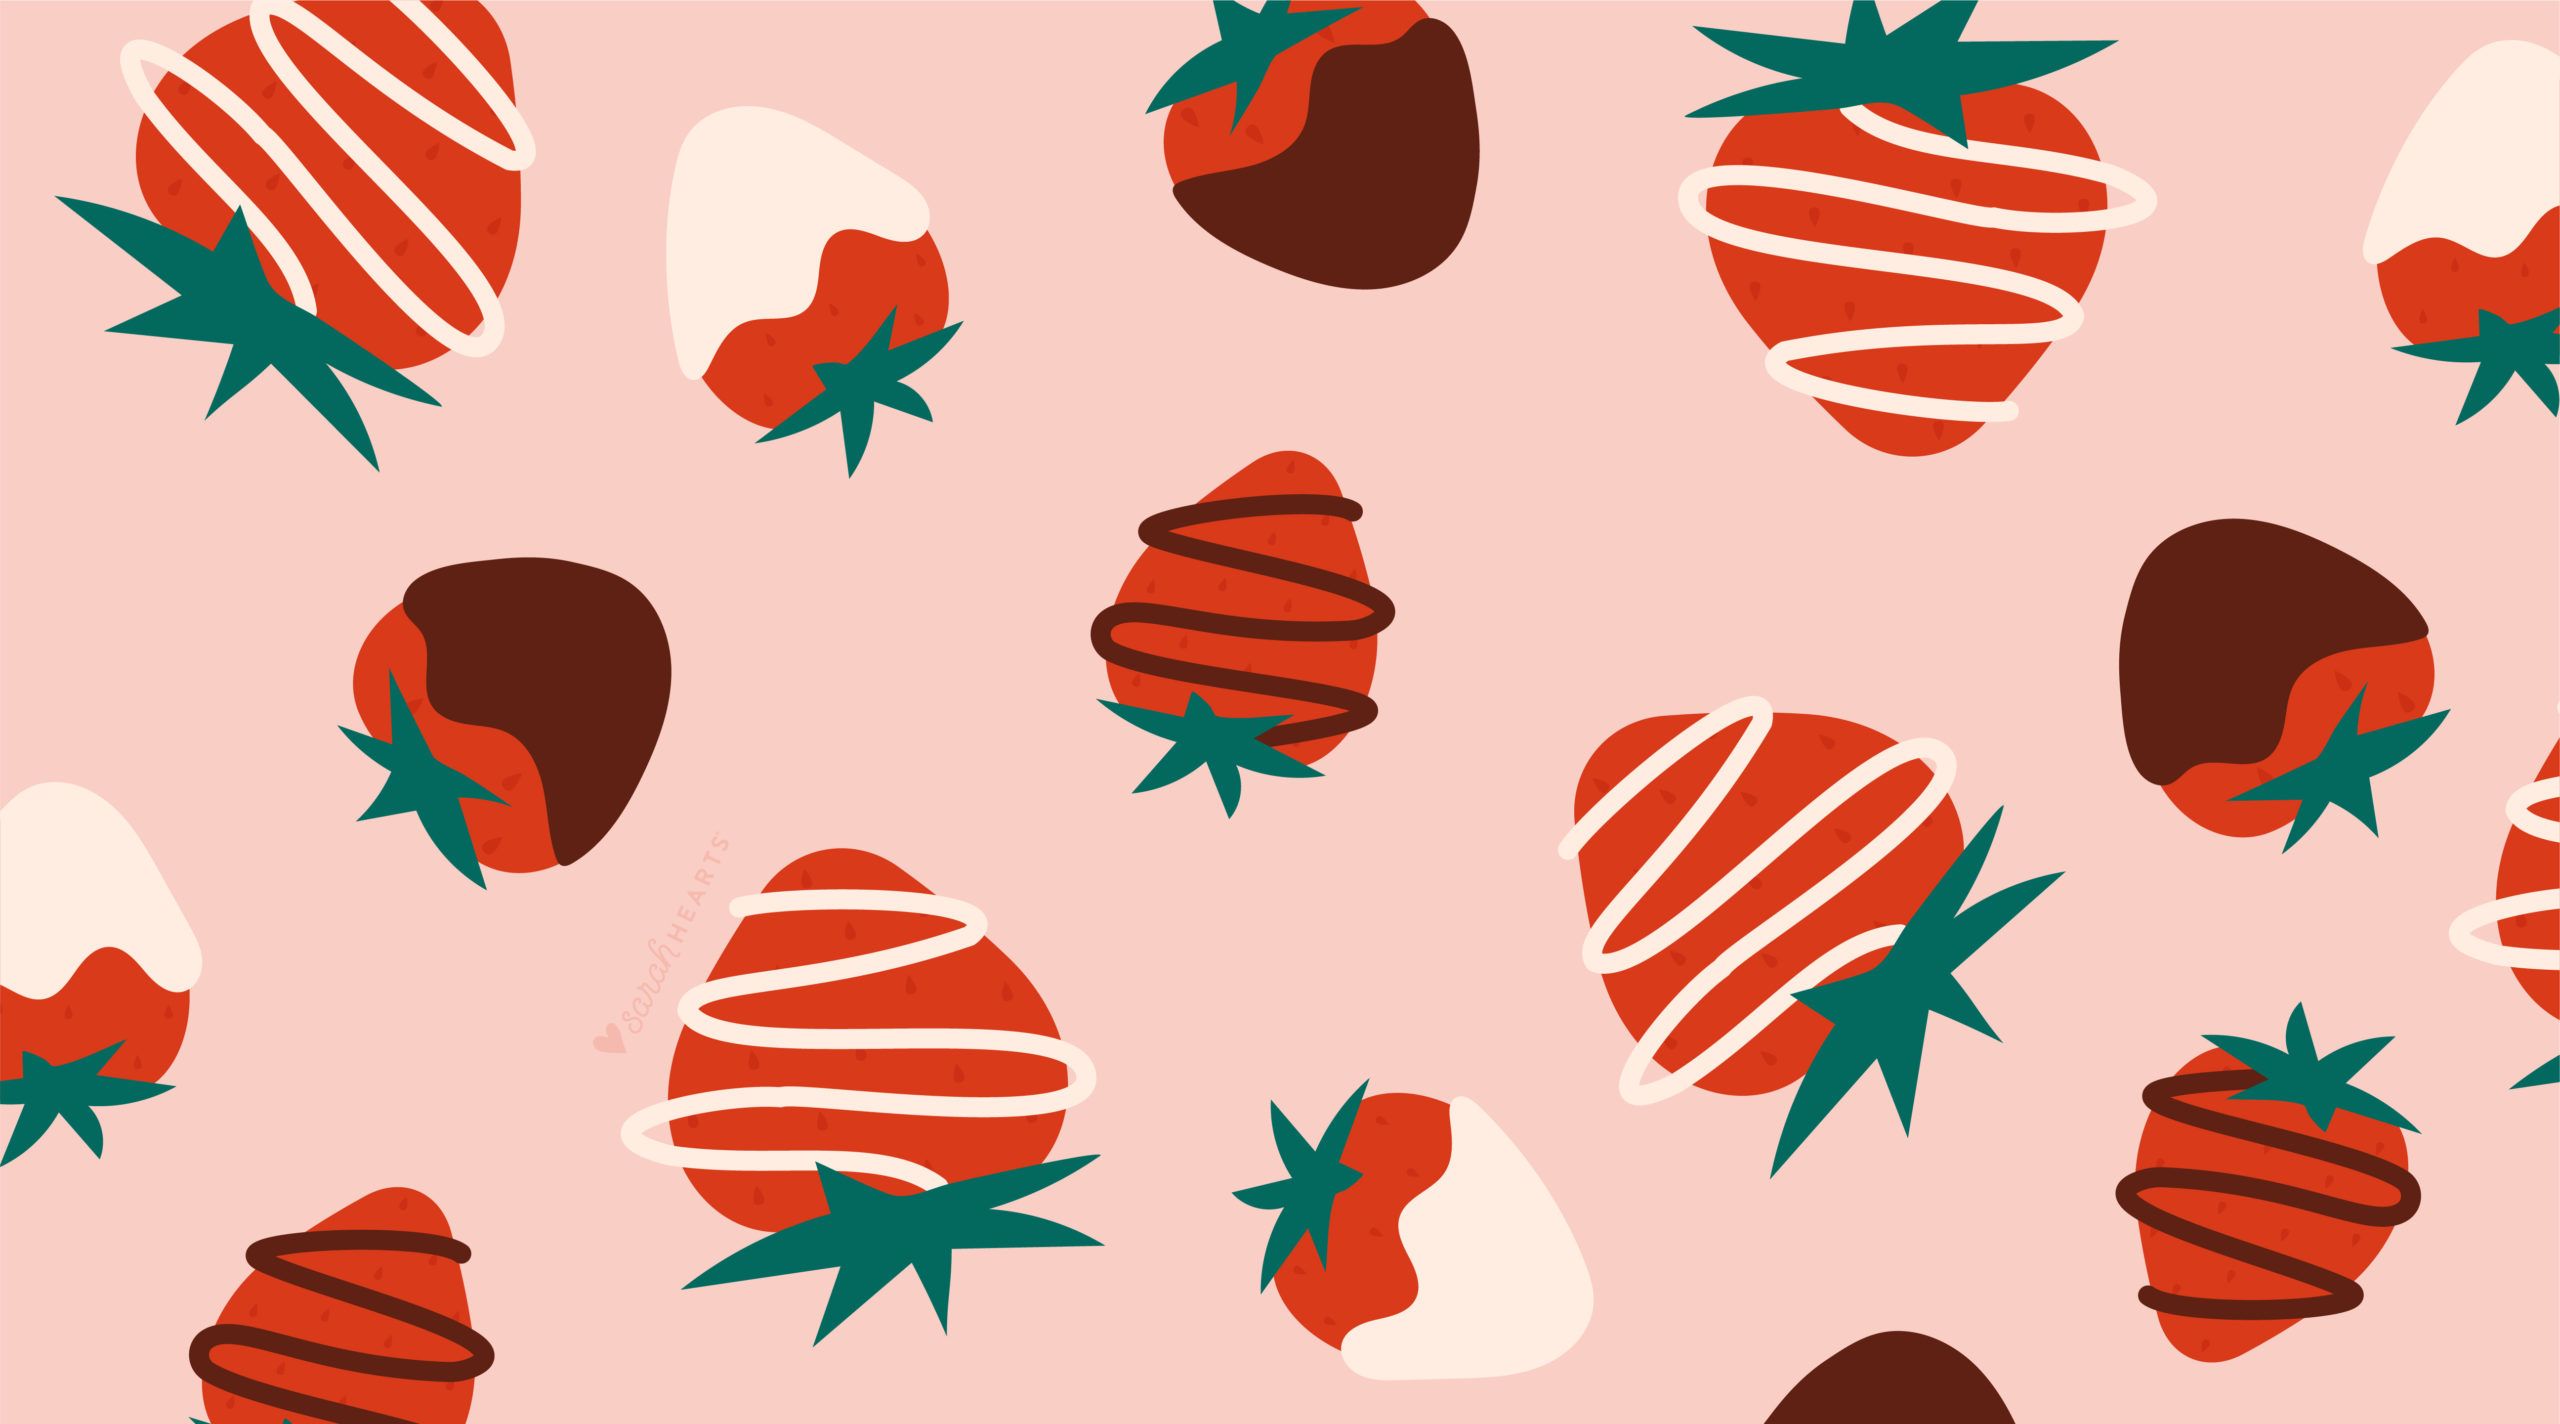 A pattern of chocolate covered strawberries on a pink background - Strawberry, February, chocolate